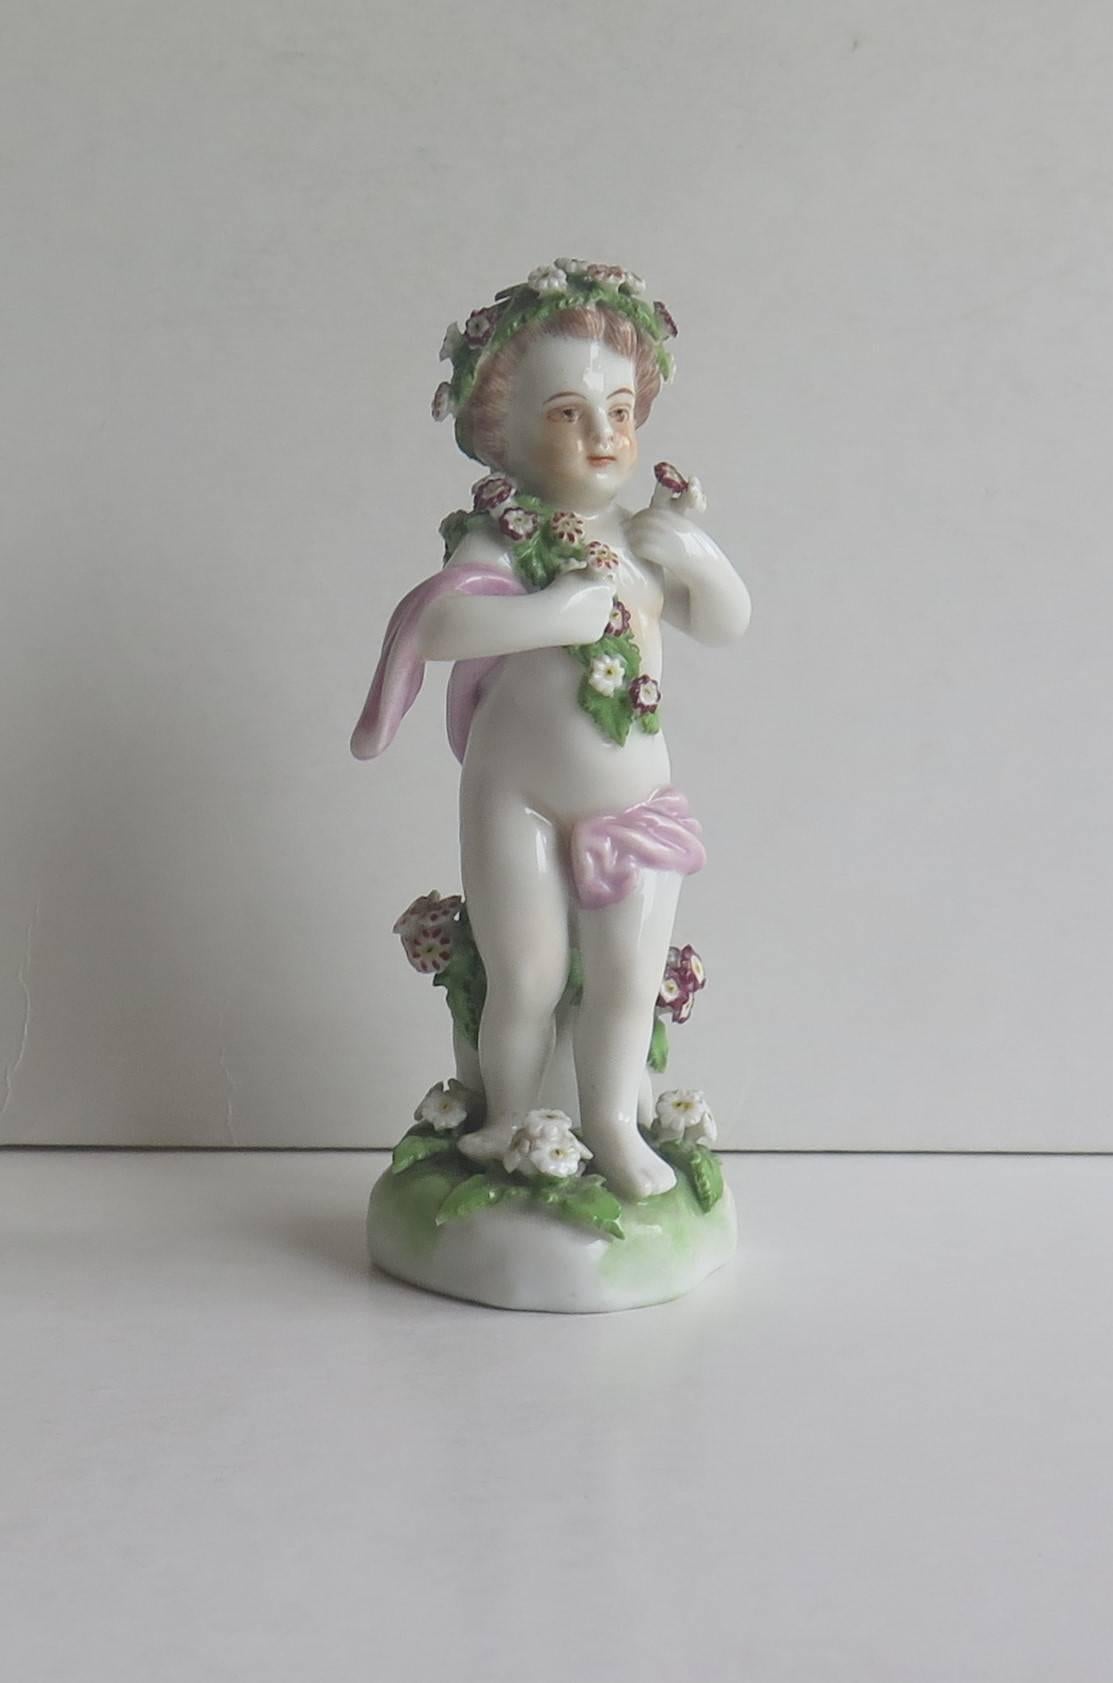 This is a very attractive porcelain figurine of a putti or cherub.

The figurine is good quality with sharply moulded, crisp decoration with garlands and grouped bunches of flowers. It is hand decorated in over-glaze enamels with flower and leaf